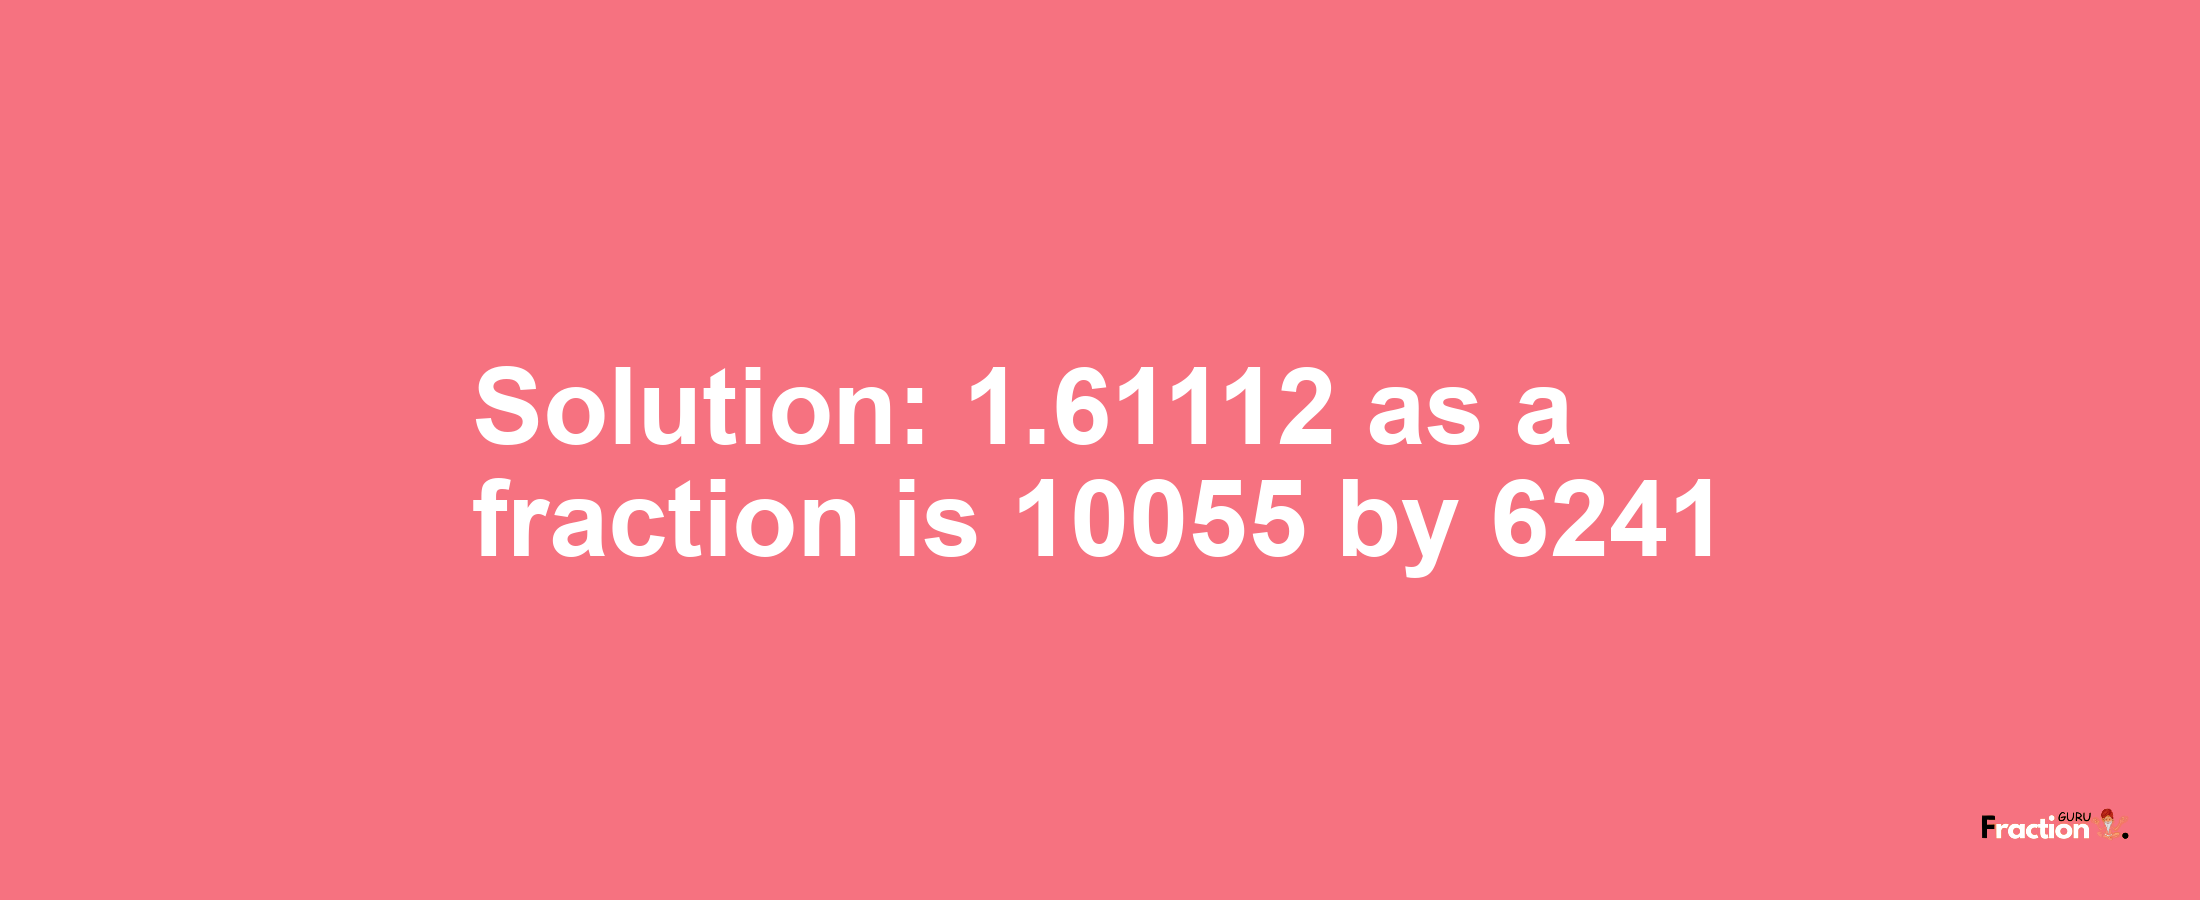 Solution:1.61112 as a fraction is 10055/6241